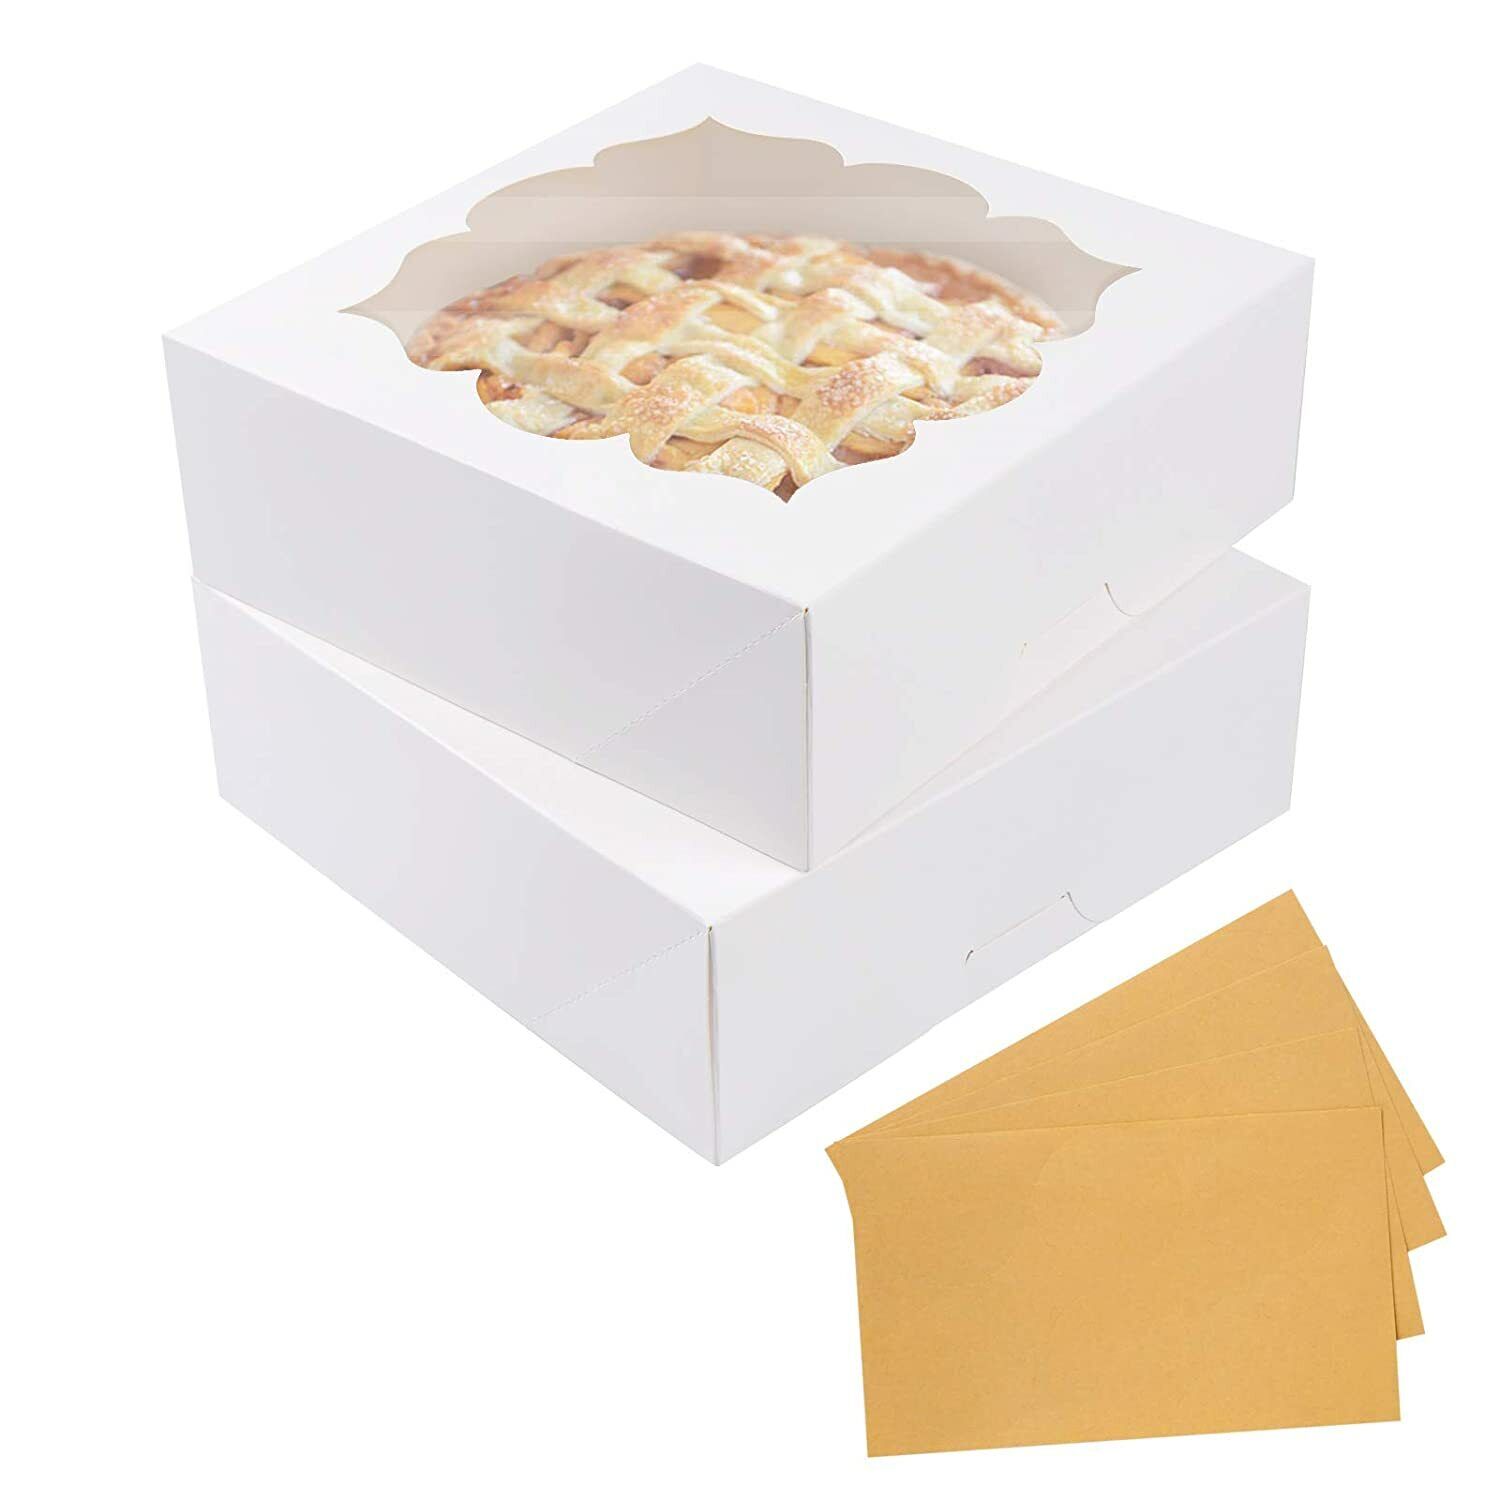 20 PCS Pie Boxes with Window Cookie Bakery Boxes and for Gift Giving 9x9x3 inch